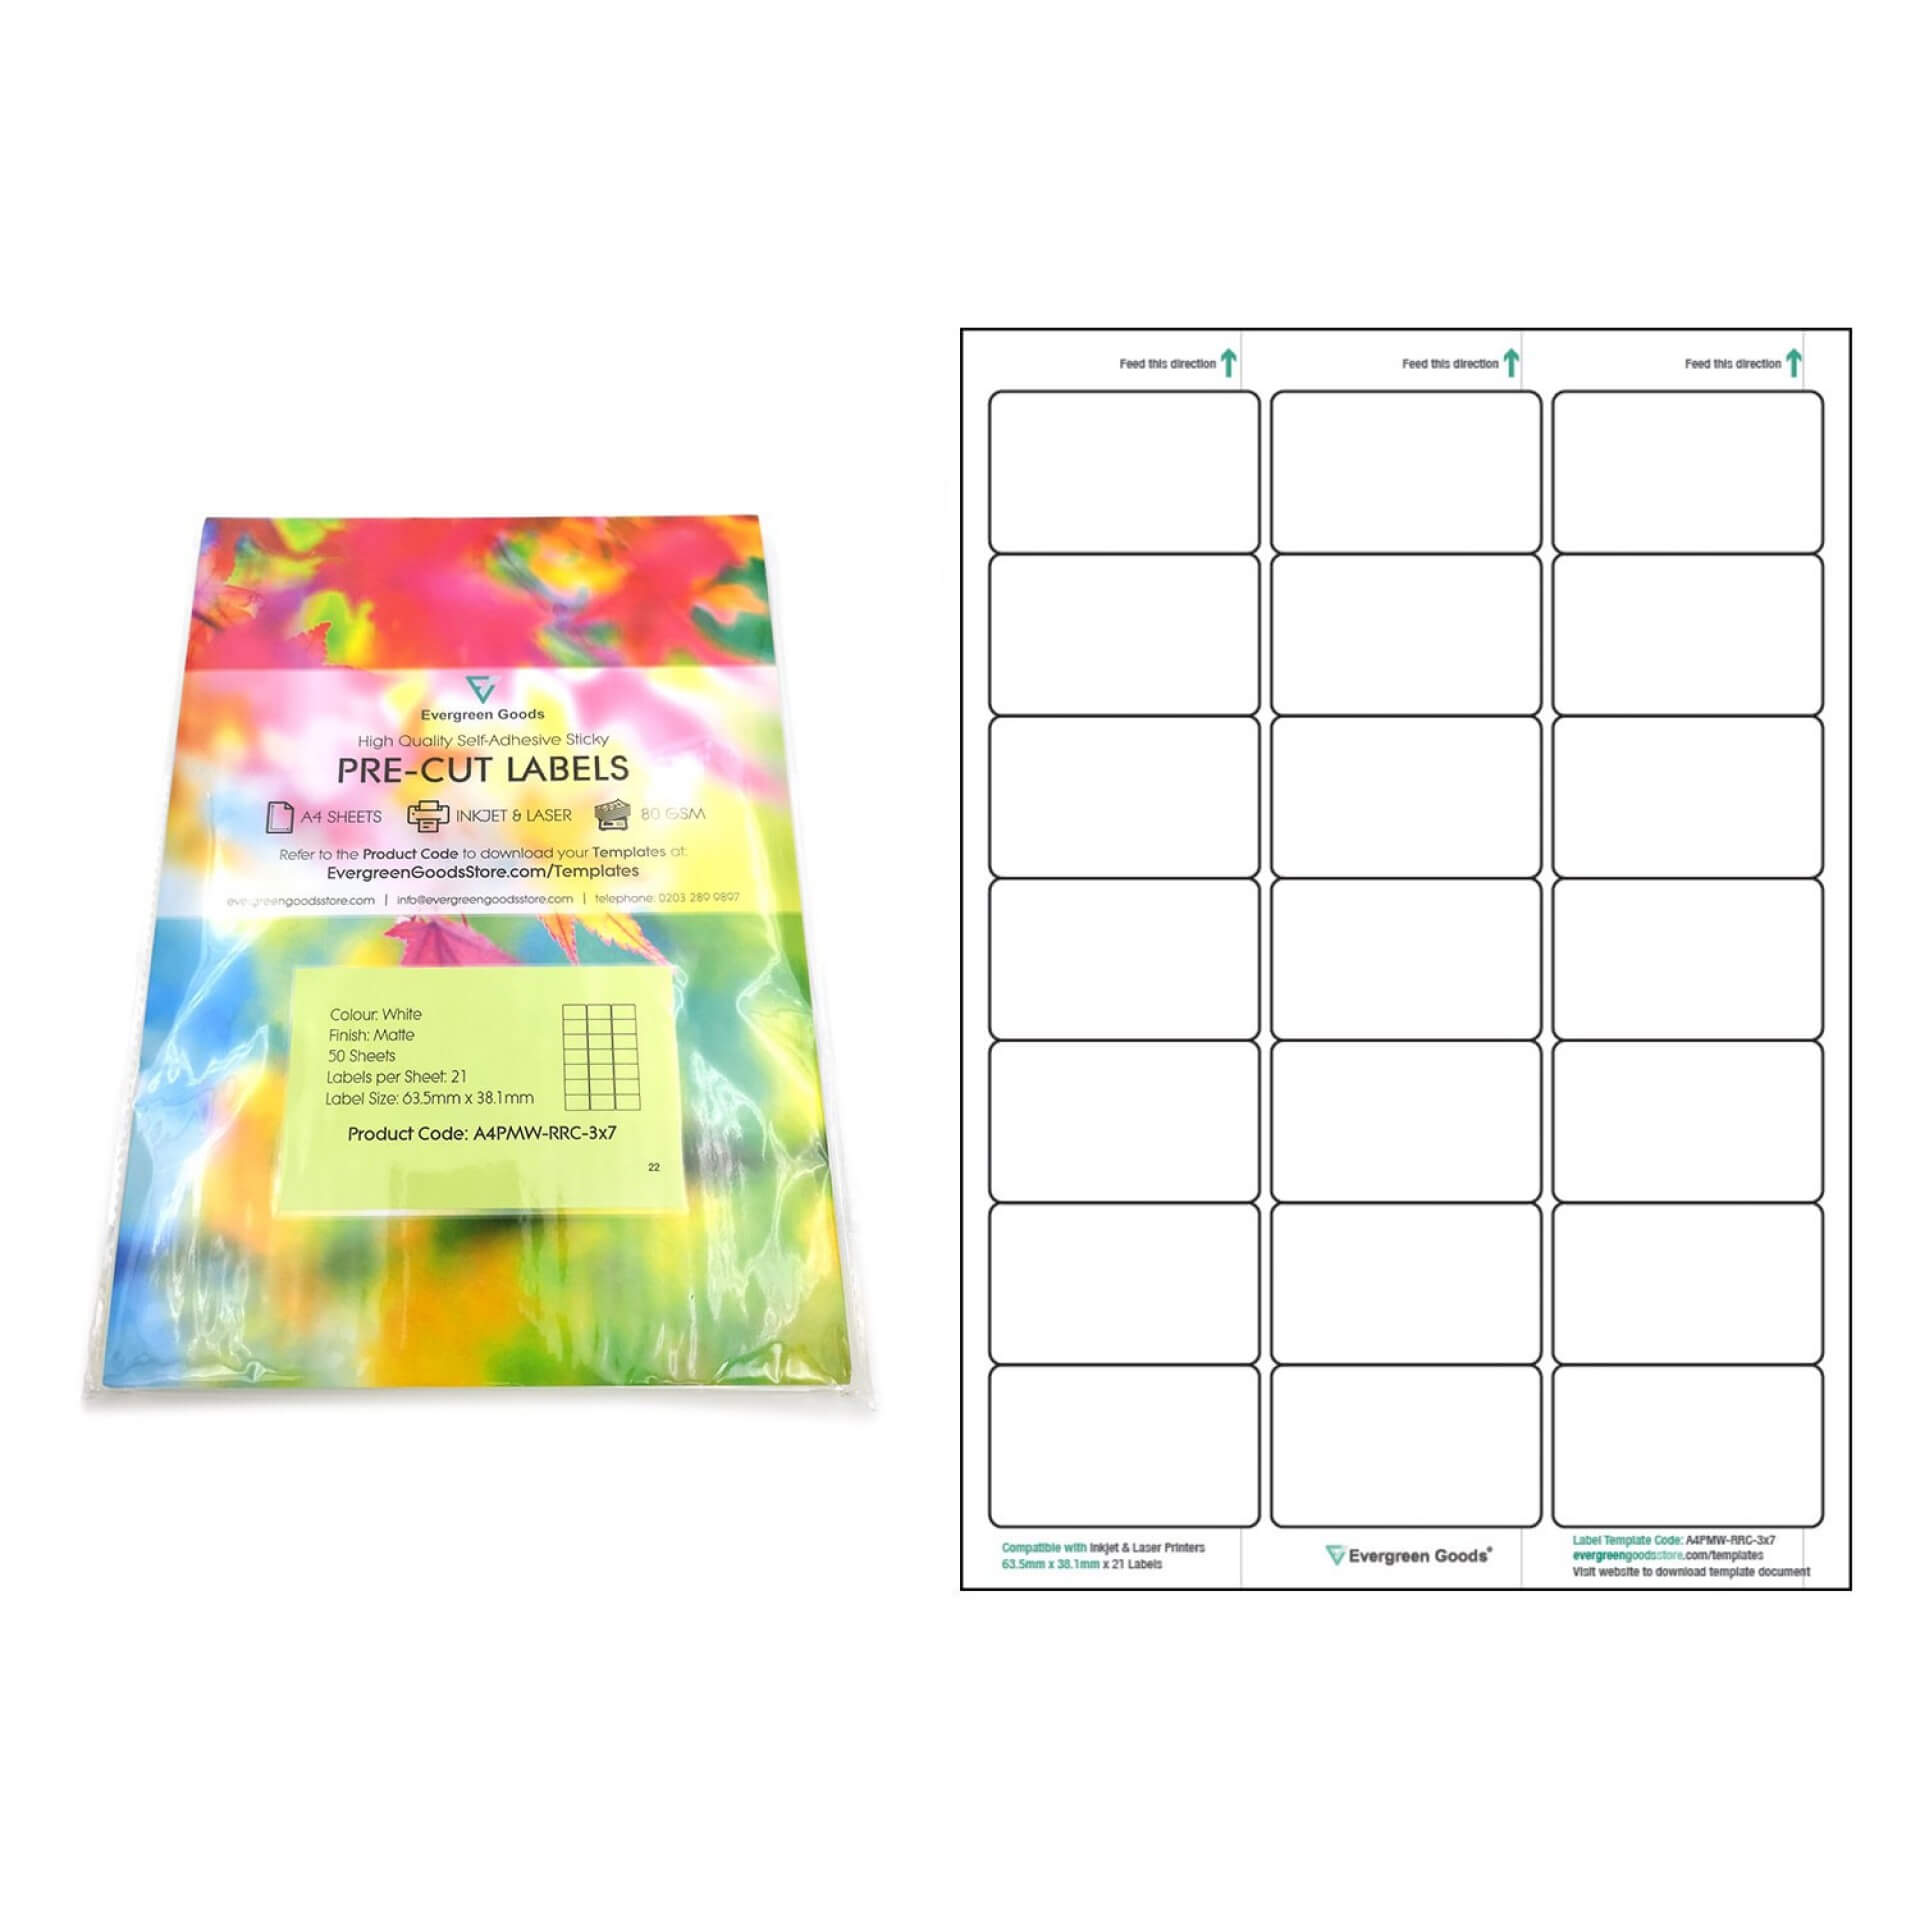 001 Word Label Template Per Sheet Ideas A4Pmw Rrc 3X7 For Label Template 21 Per Sheet Word